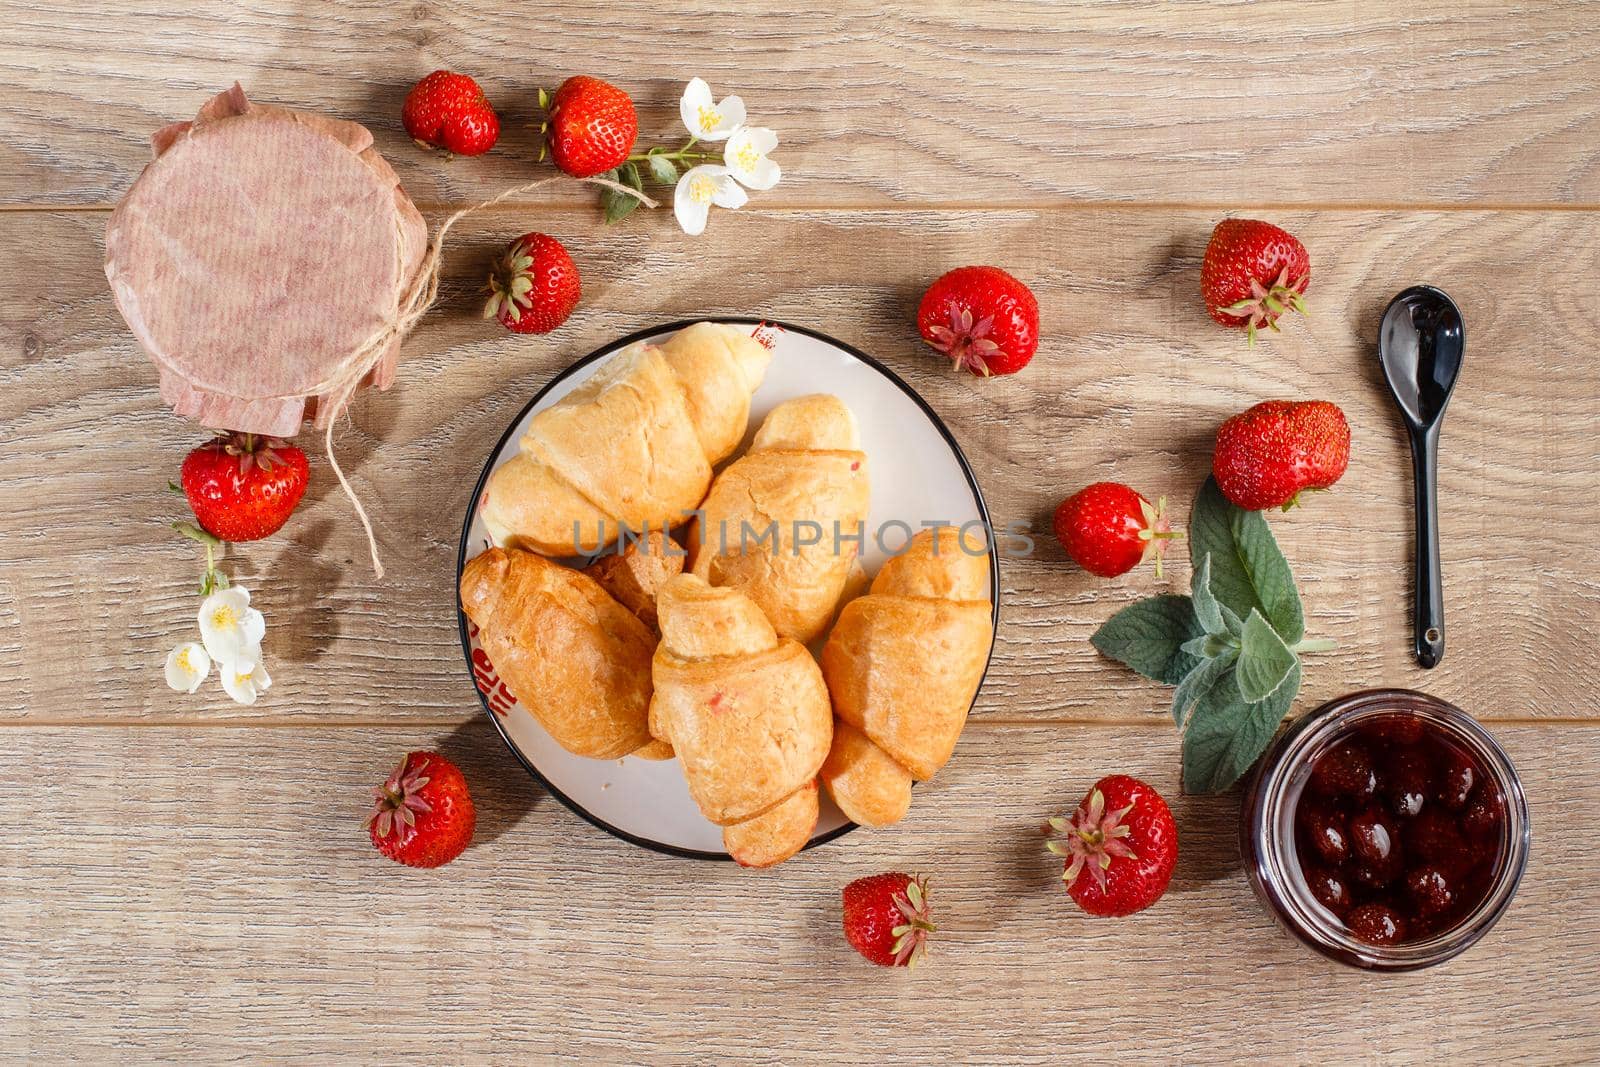 Traditional homemade strawberry jam in jars and plate with croissants, decorated with fresh strawberries Top view